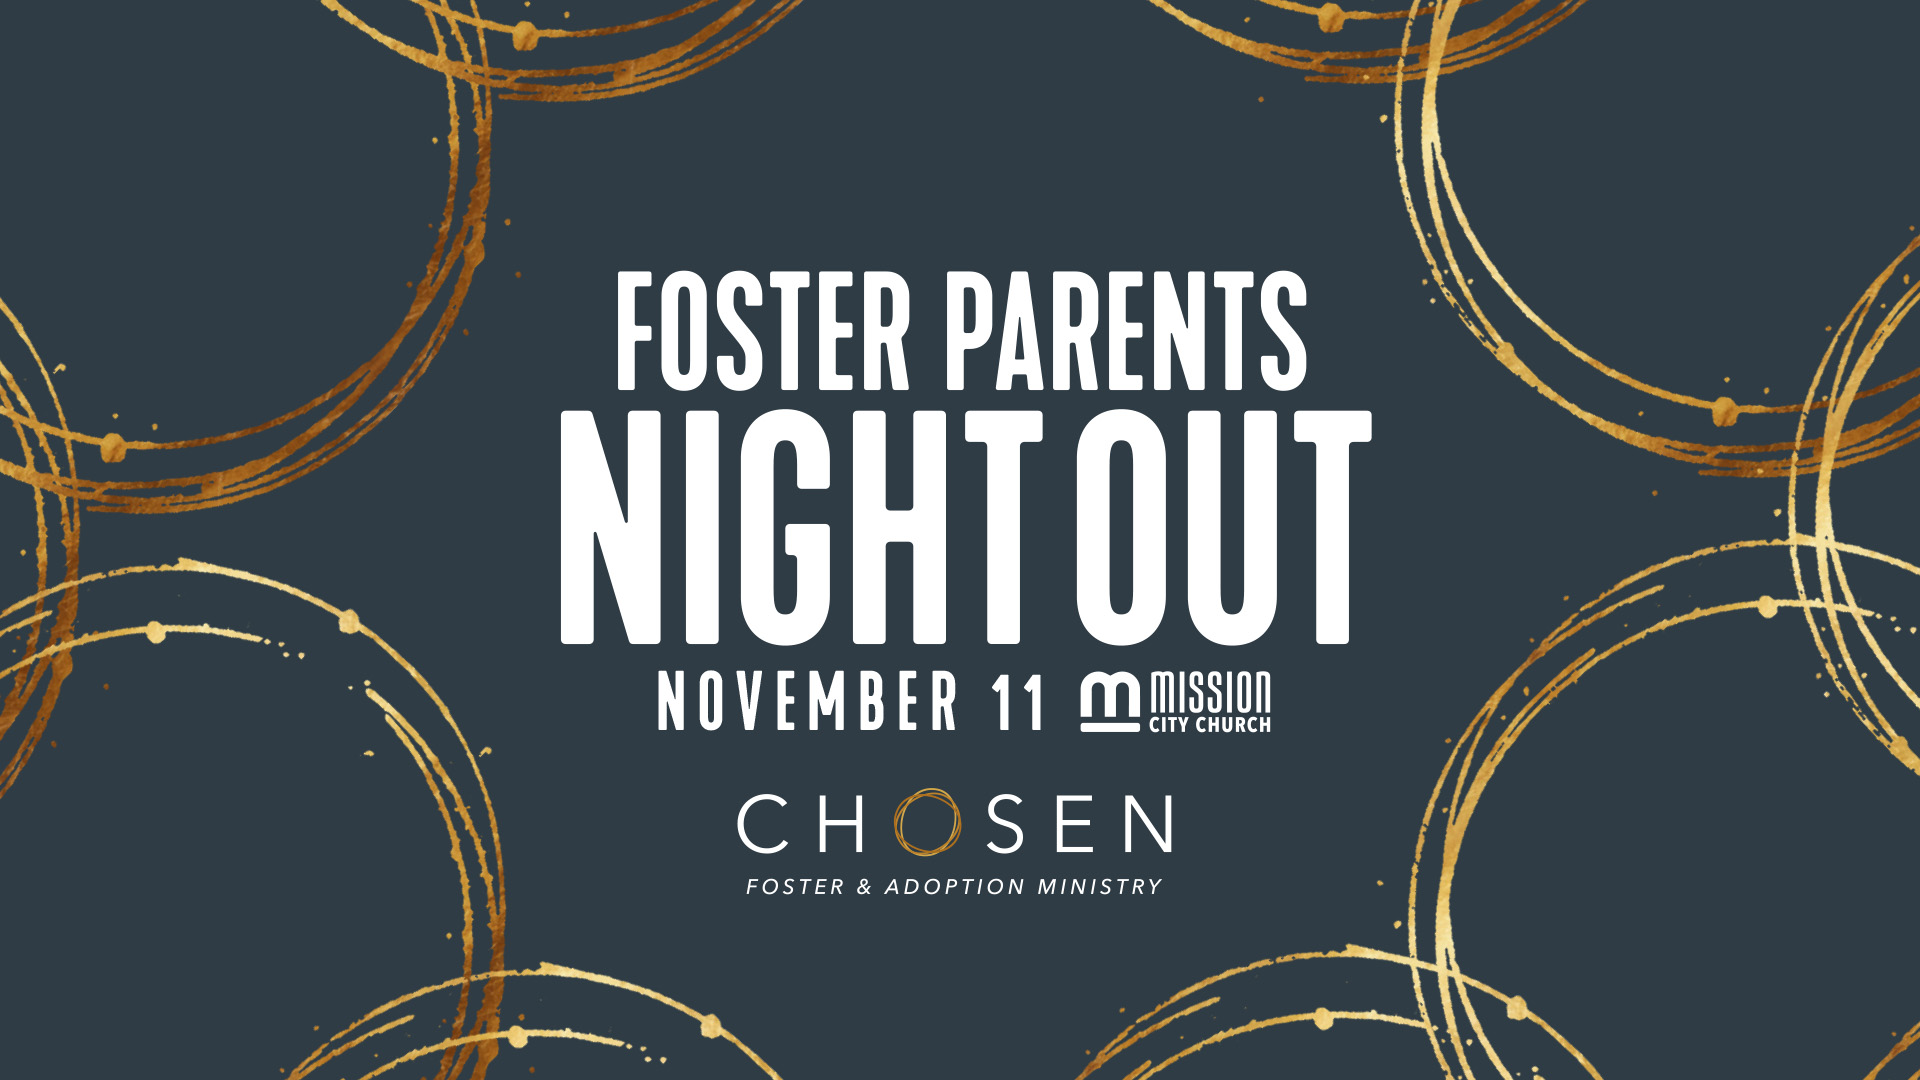 Chosen Ministry at Mission City Church offering a Foster Parents Night Out